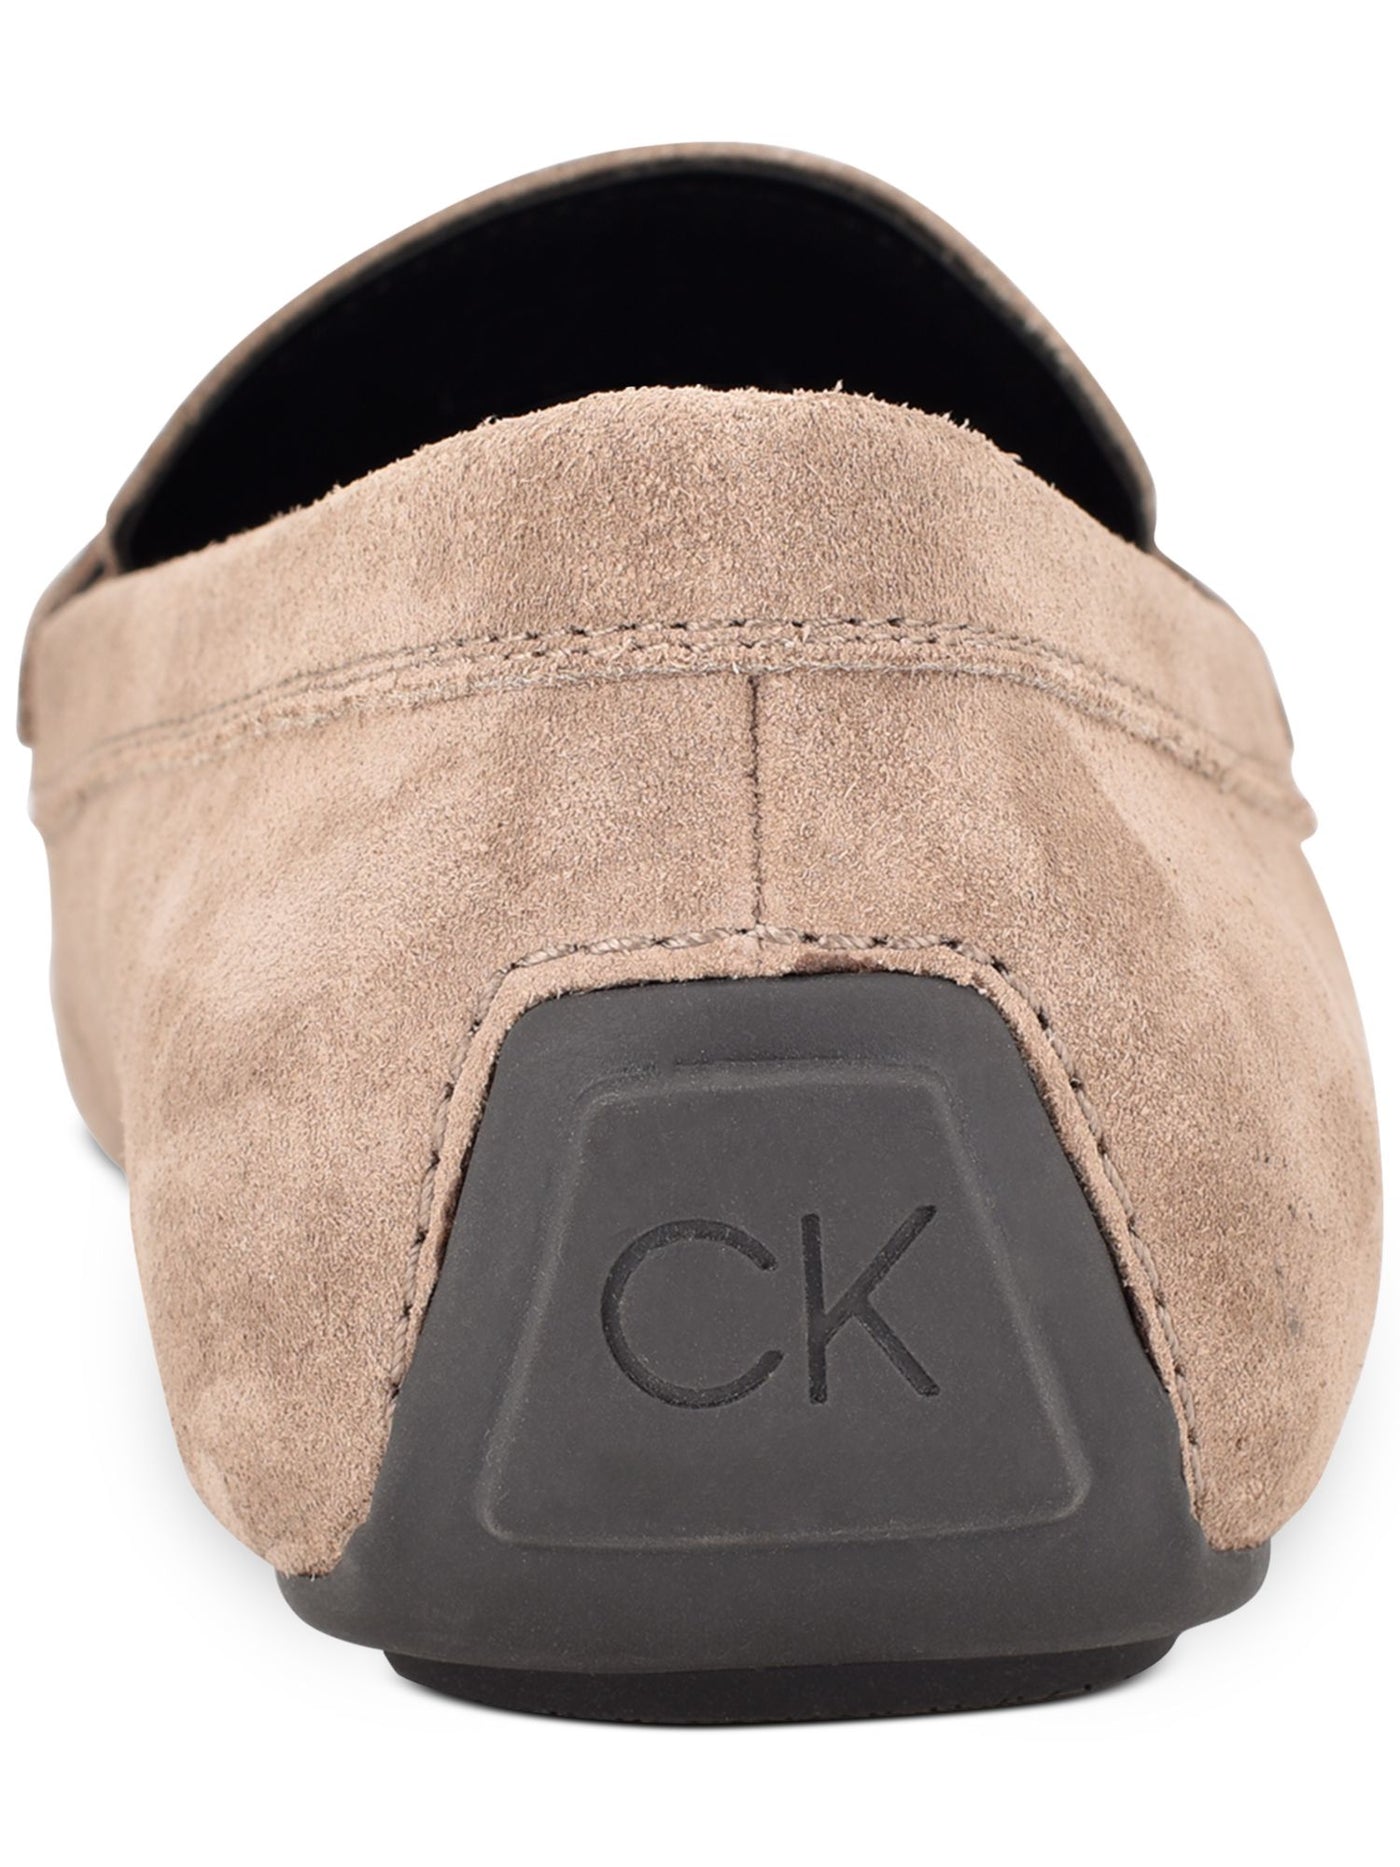 CALVIN KLEIN Womens Beige Moc Toe Brand Over Vamp Oliver Square Toe Slip On Leather Loafers Shoes 8.5